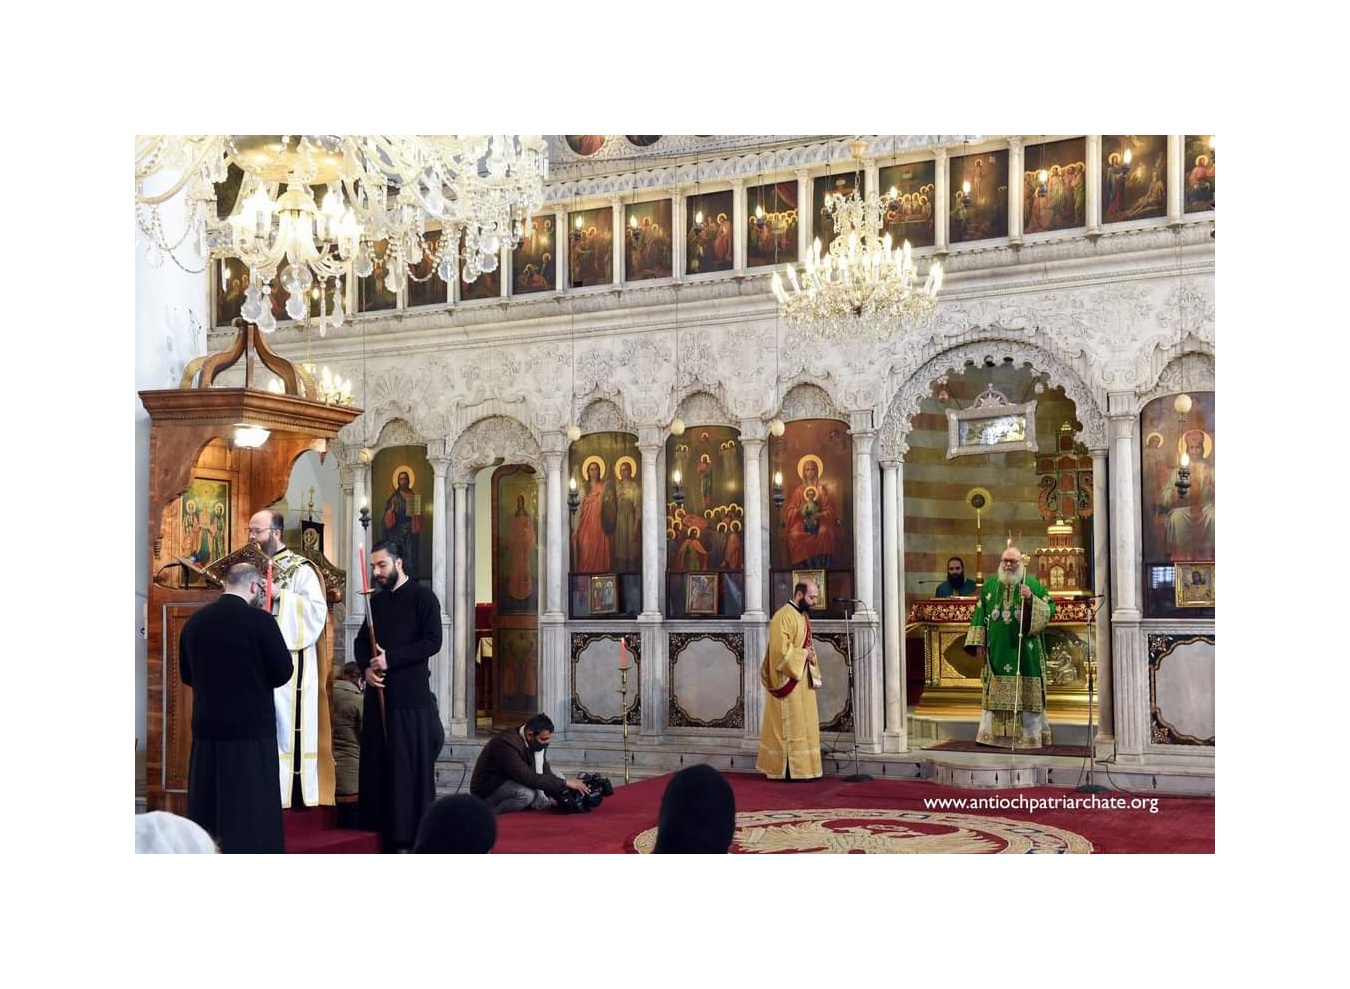  Patriarch John X of Antioch Patrichate during the liturgy of Christmas at the St Mary's Cathedral, Damascus 